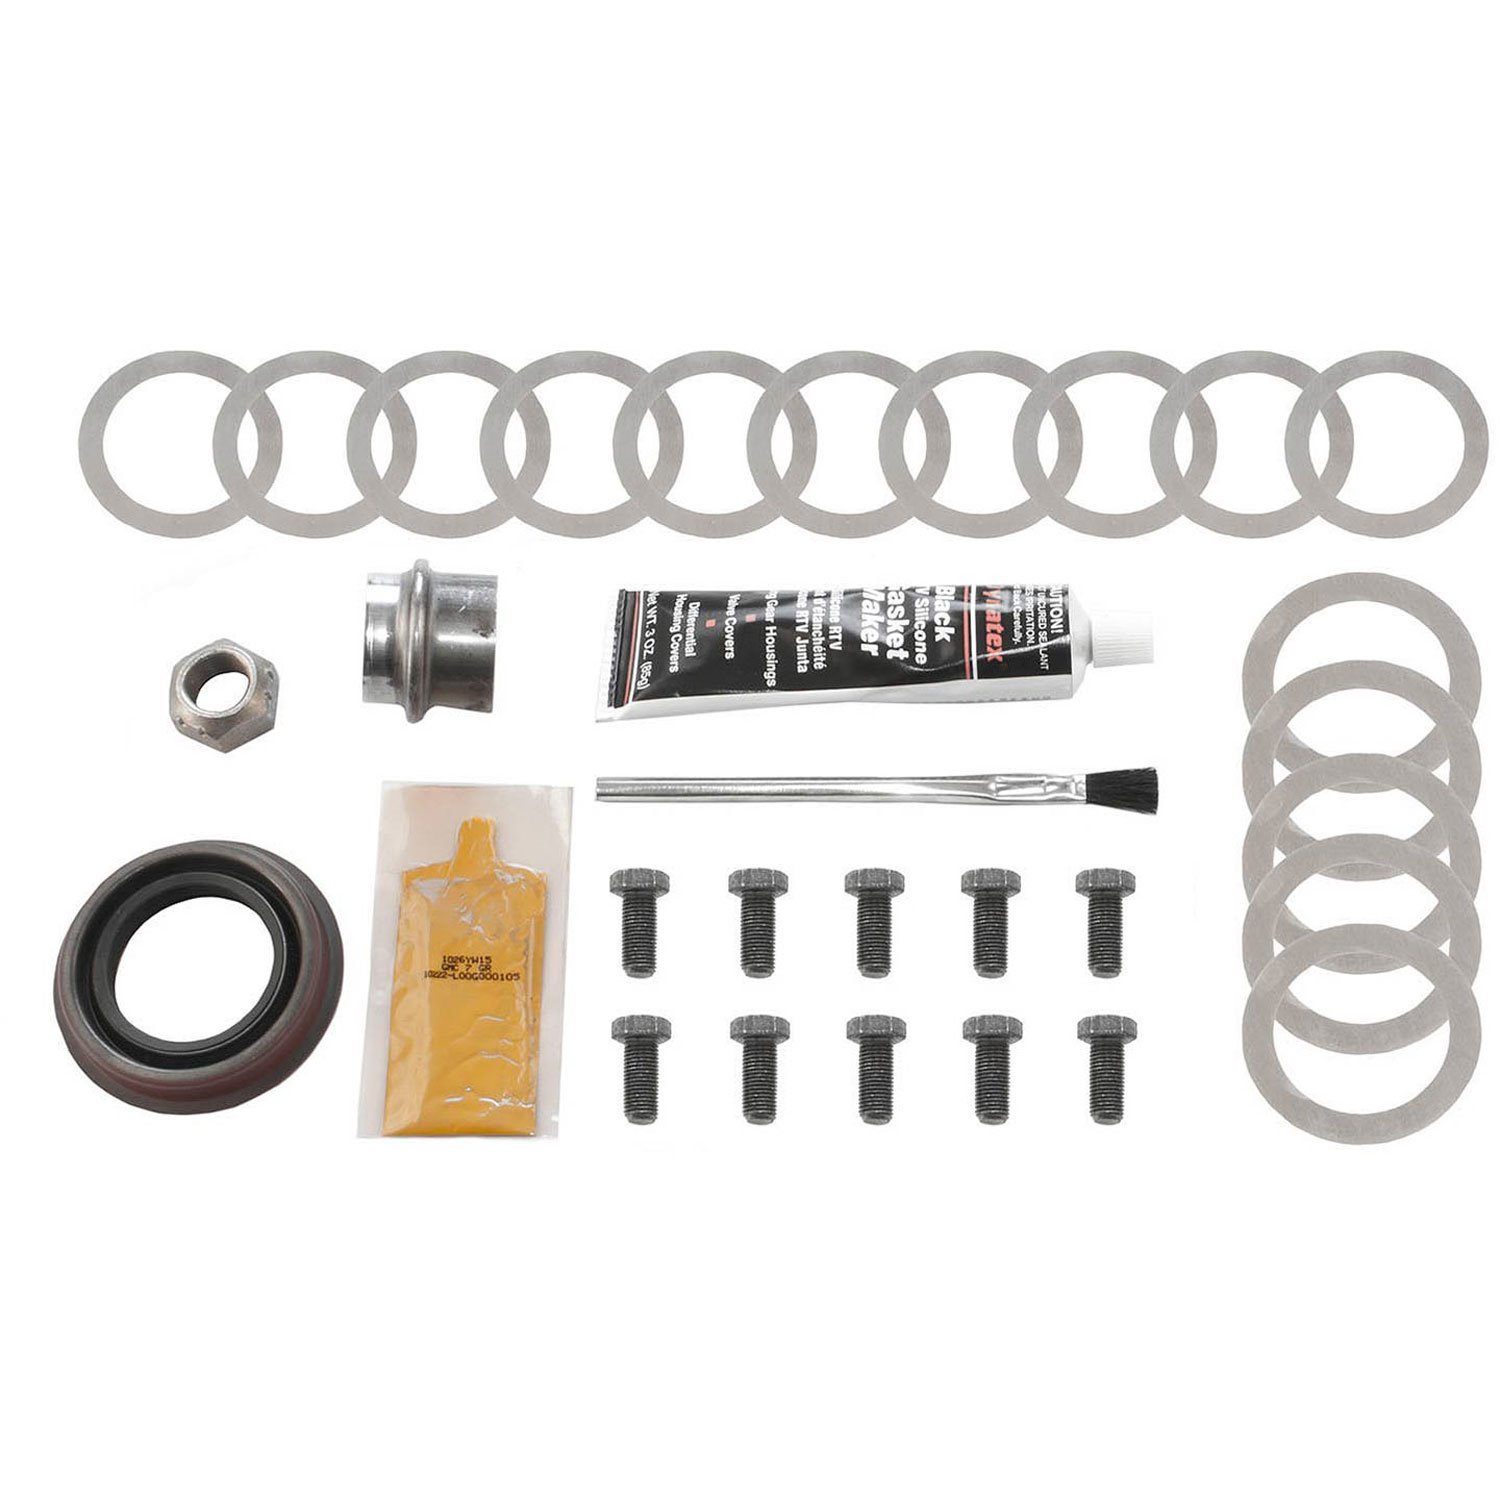 Ring And Pinion Installation Kit; Incl. Pinion-Carrier Shims/Pinion Nut/Ring Gear Bolts/Gear Marking